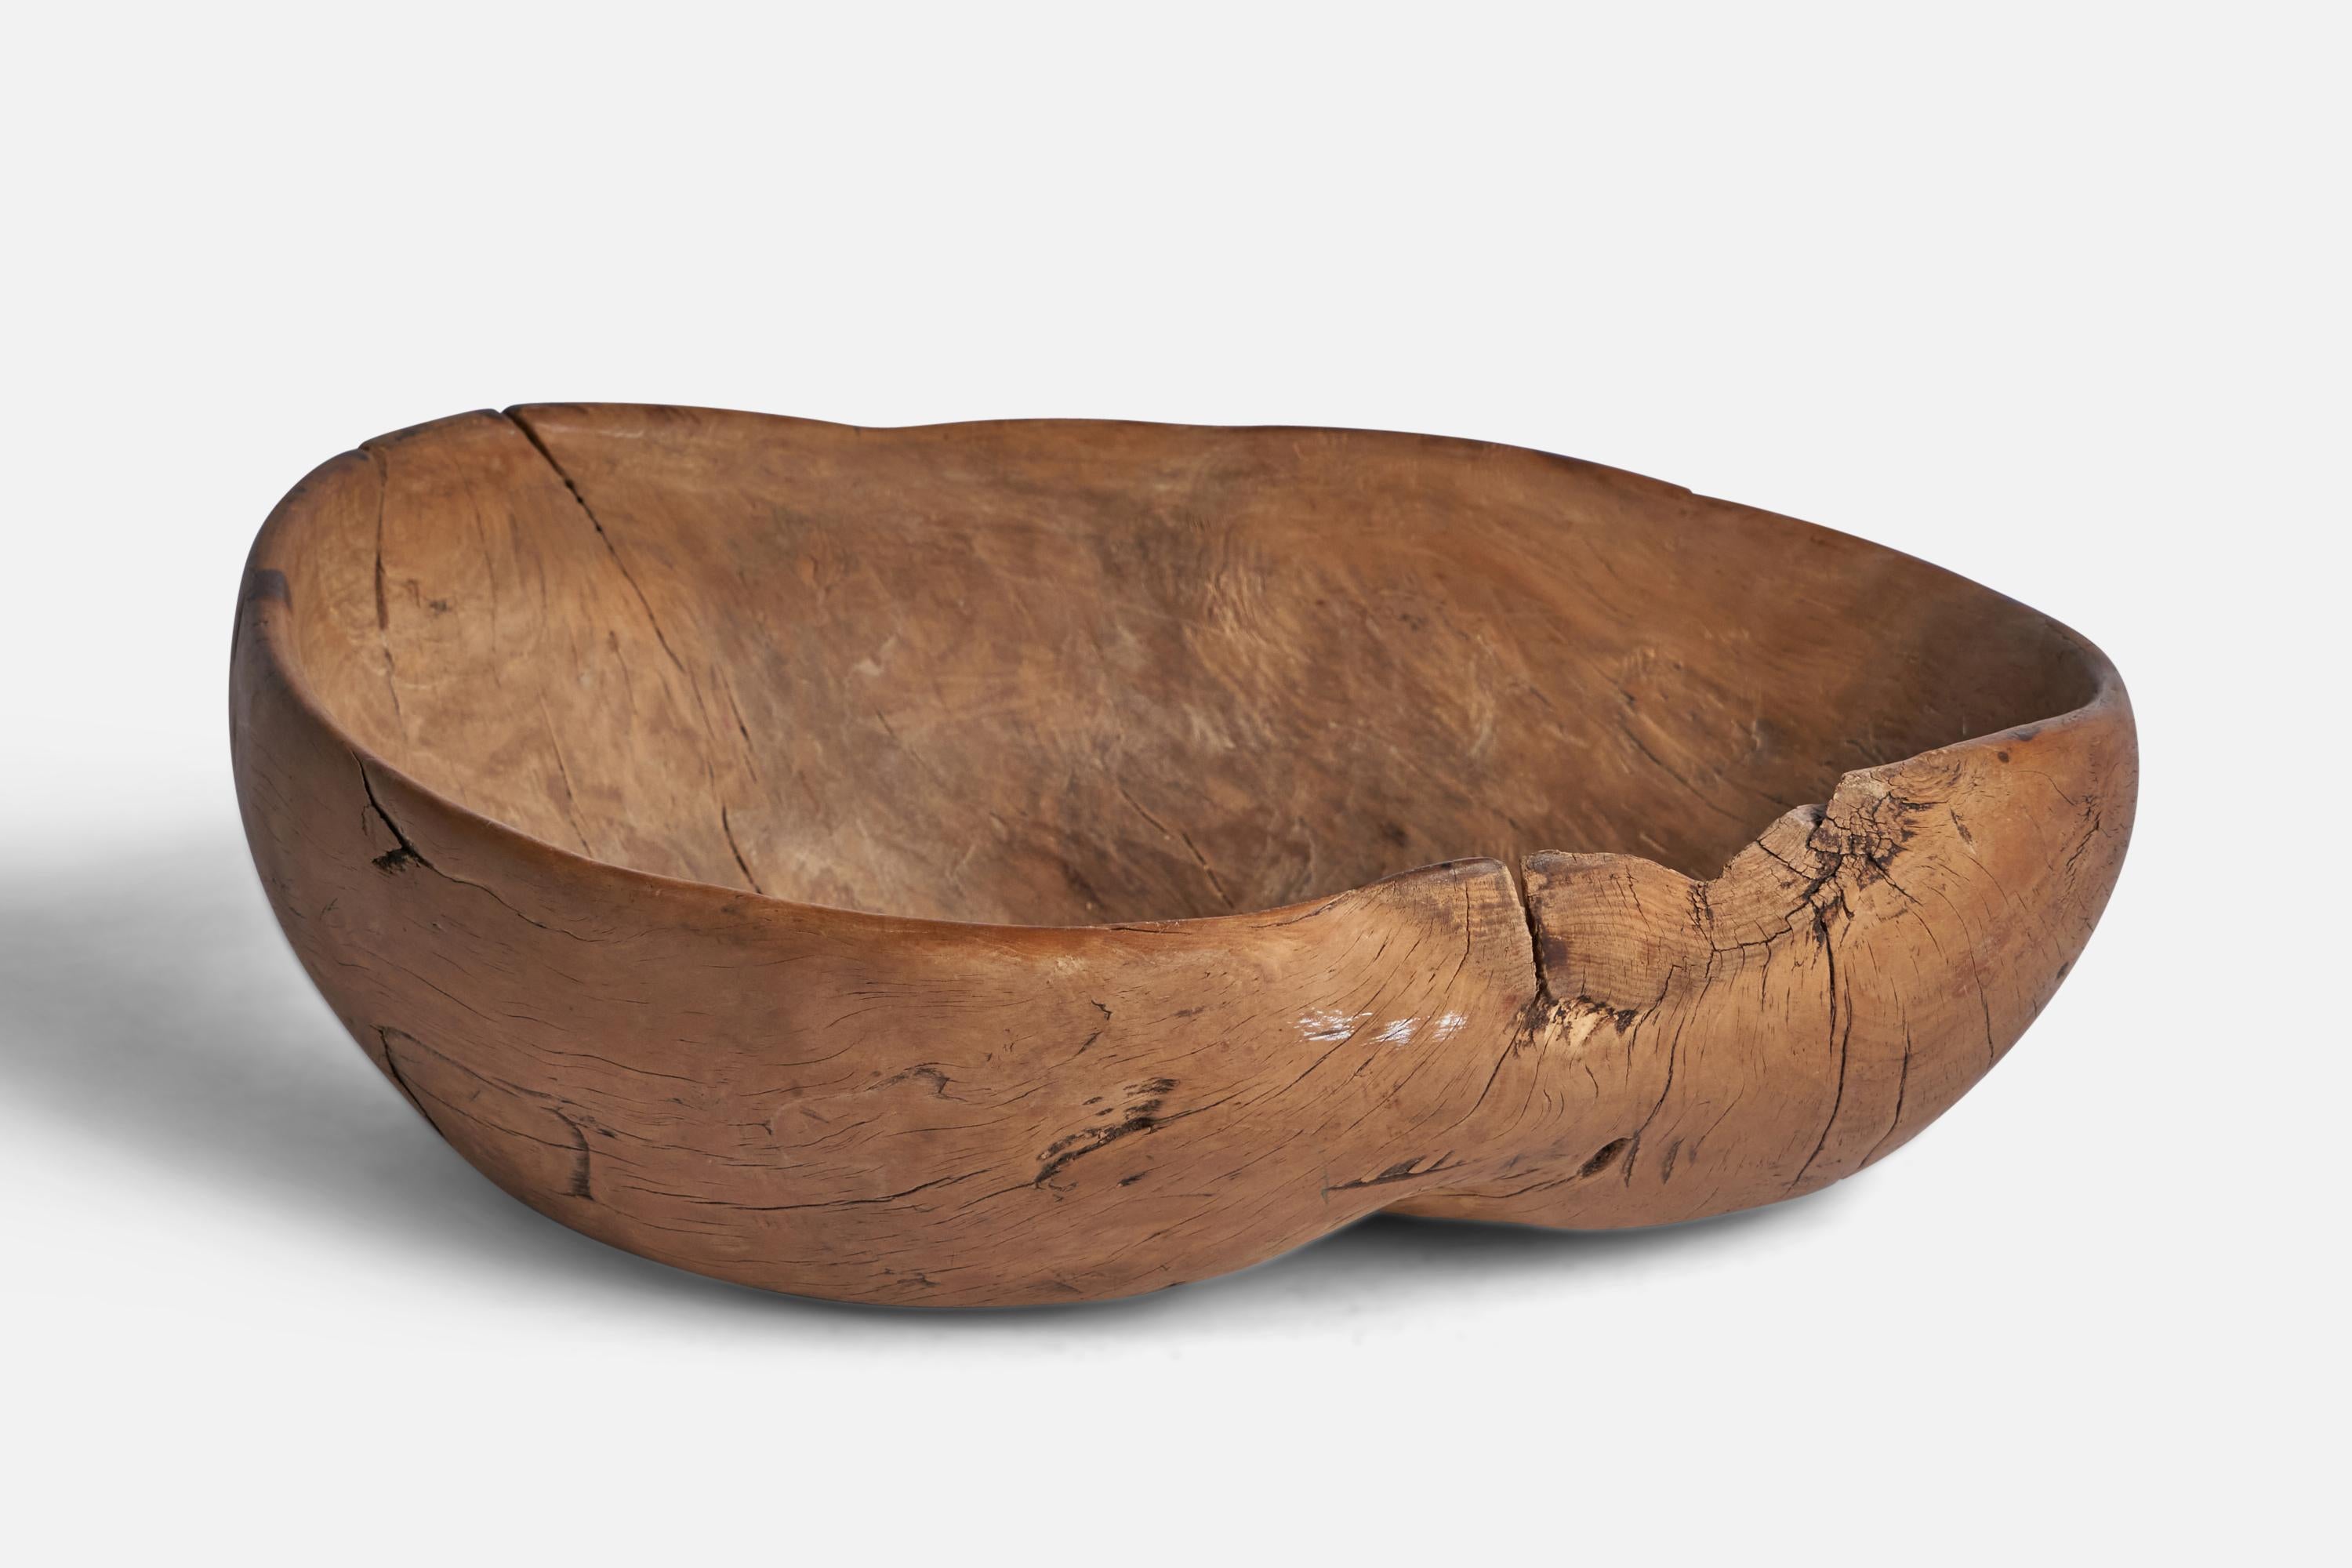 A burl wood bowl produced in Sweden, 19th century.